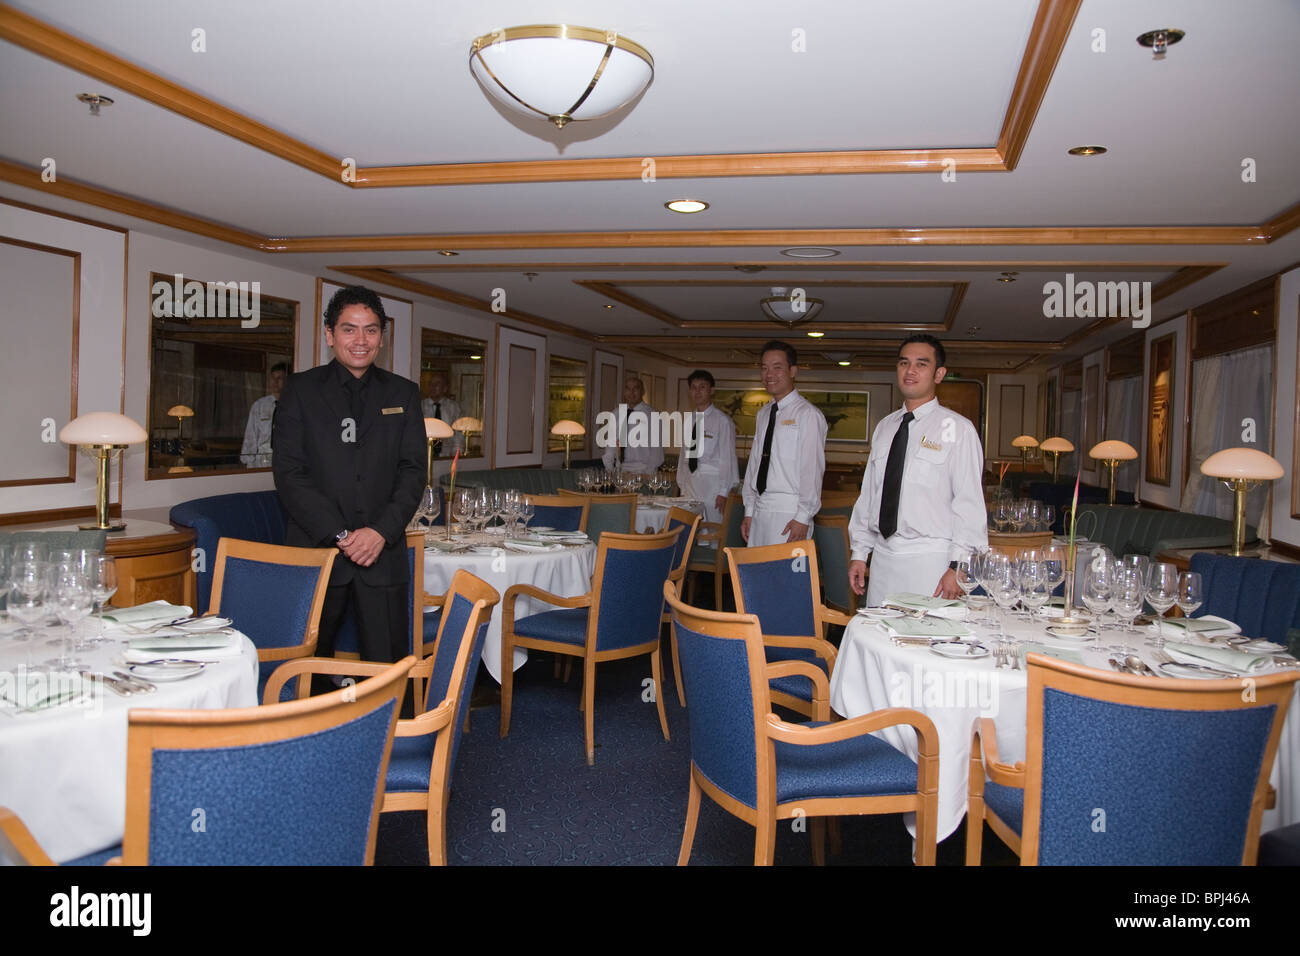 entire dining room staff